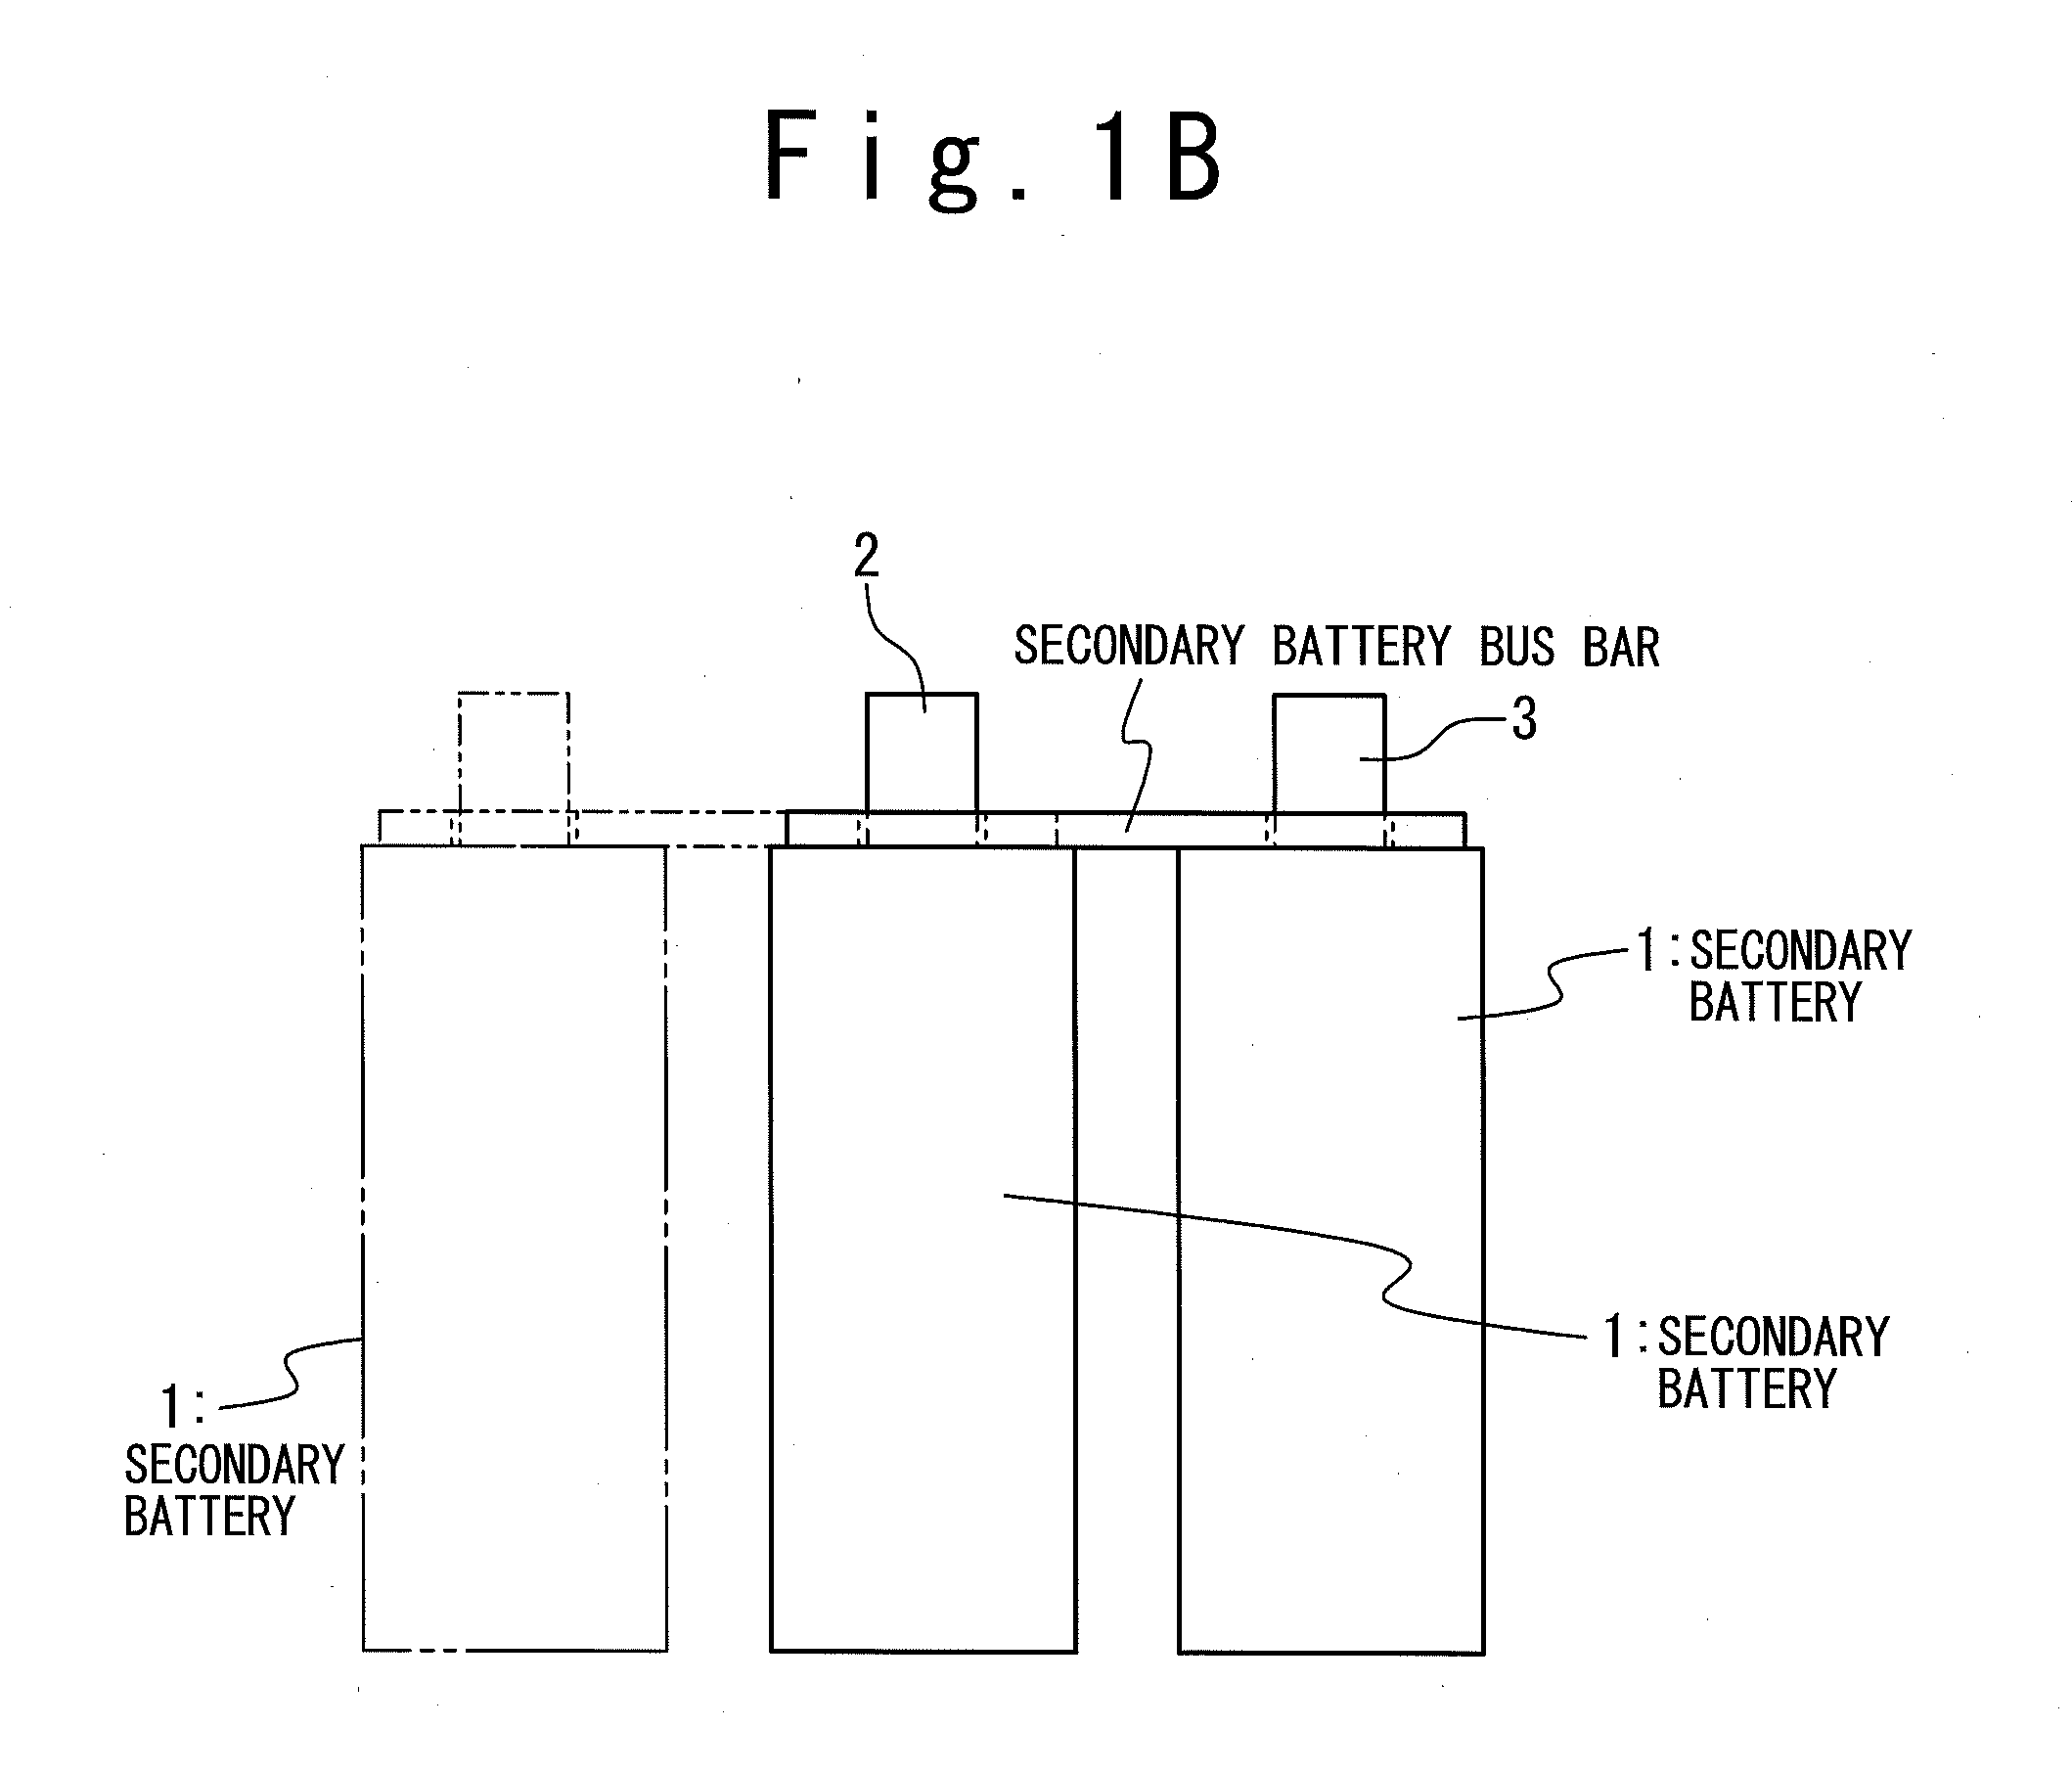 Bus bar for secondary battery and secondary battery module